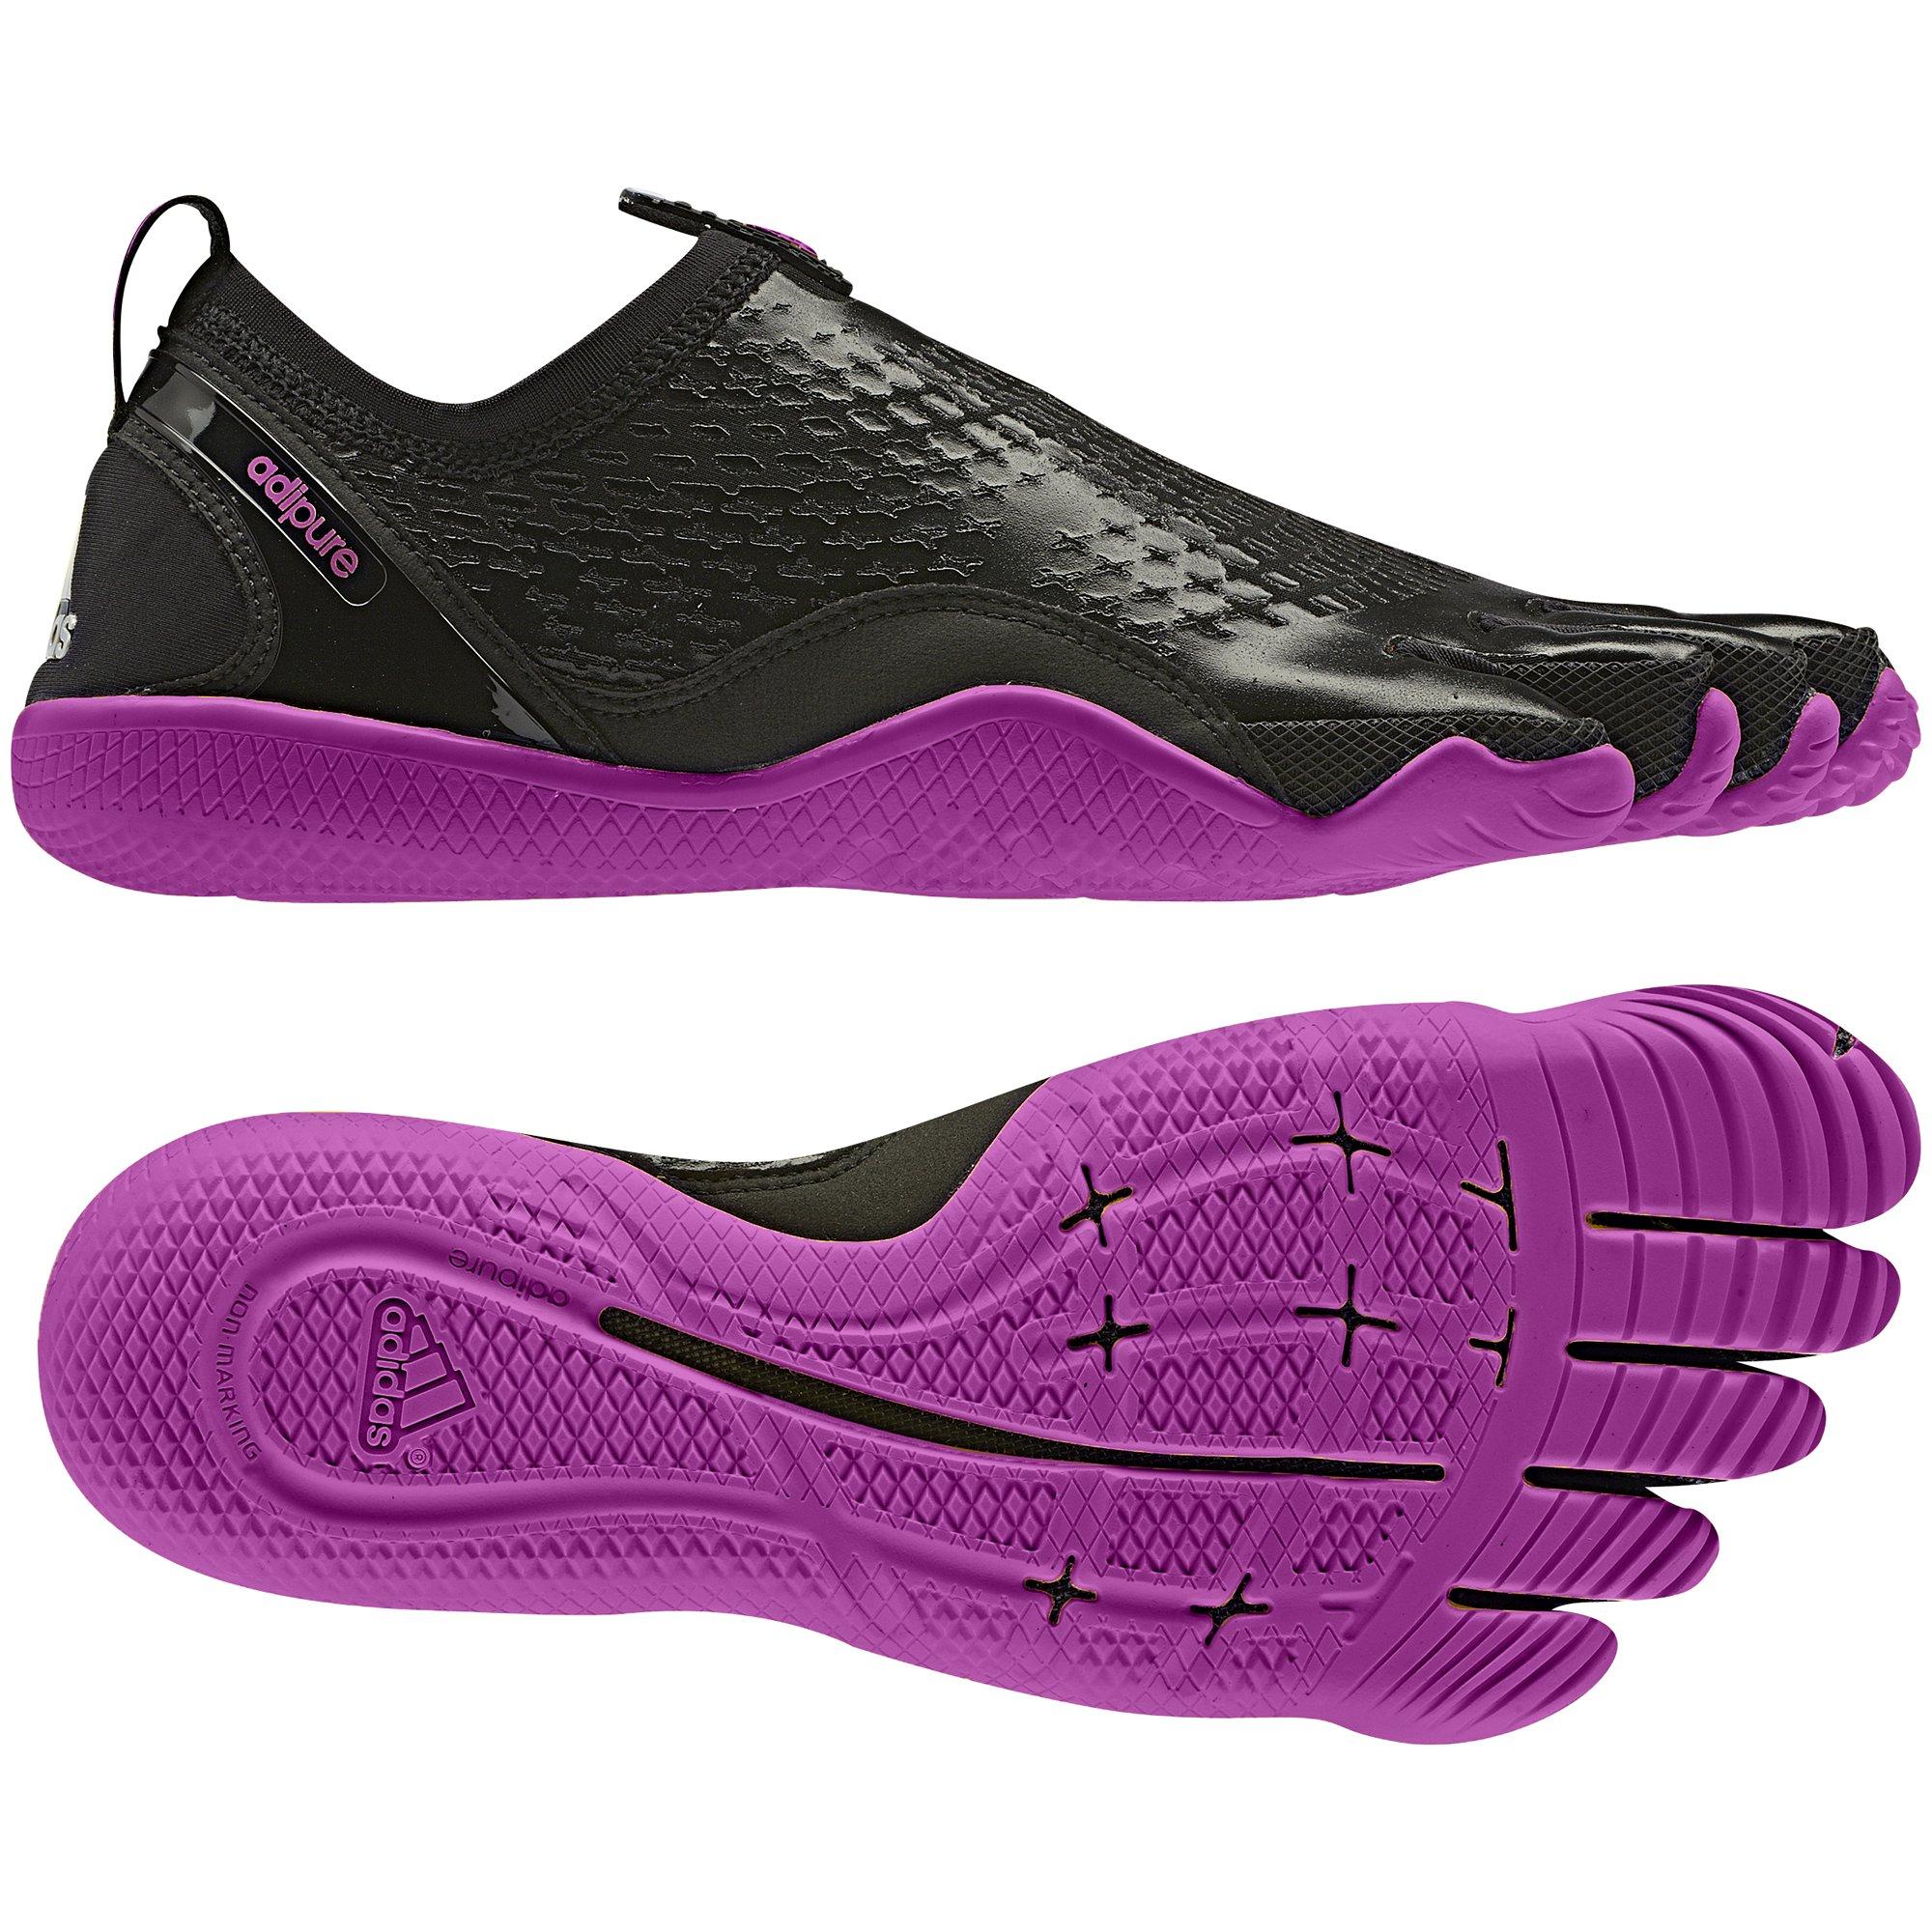 Foto adidas Adipure Trainer 1.1 Shoes Mujer